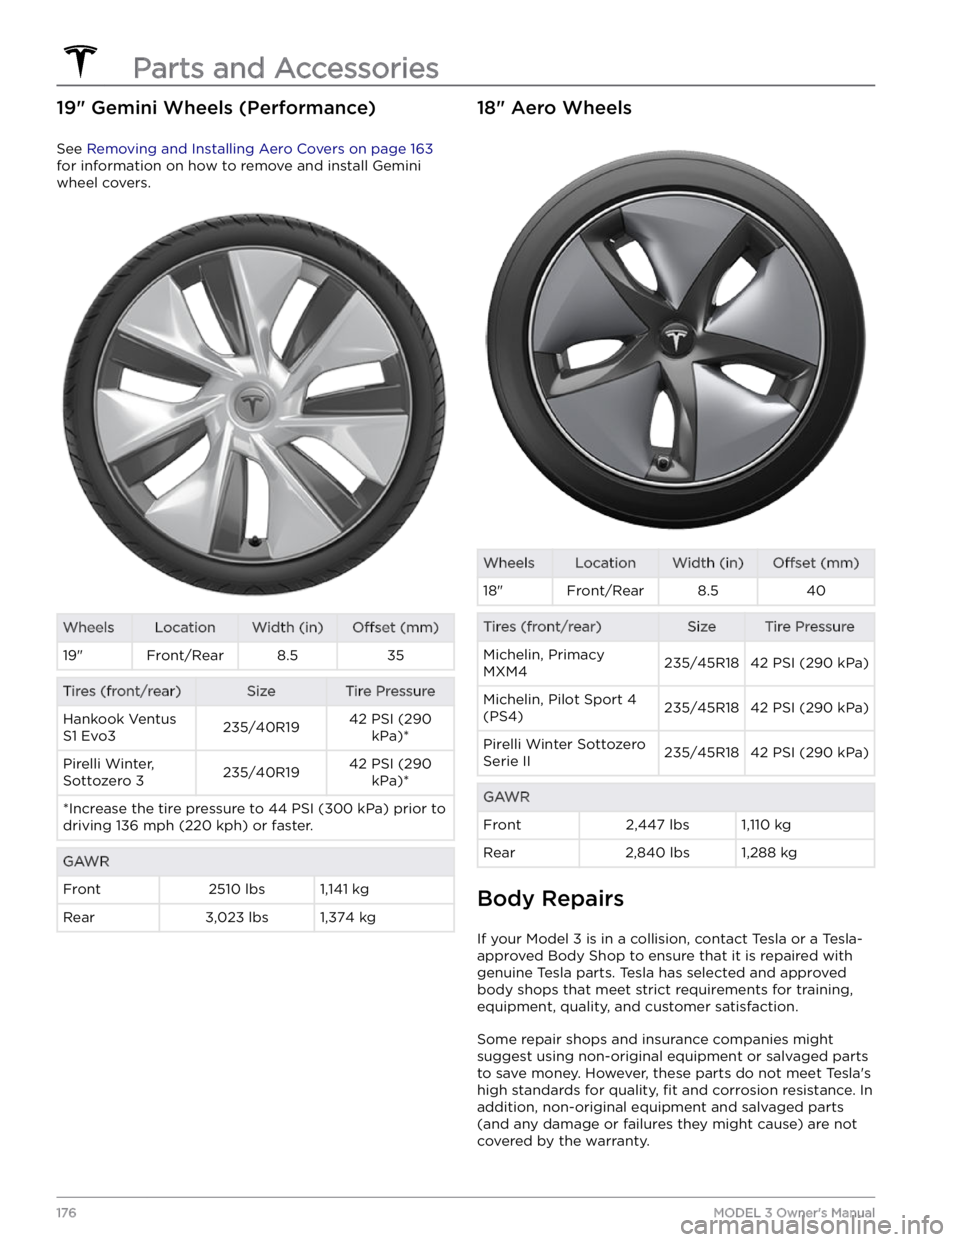 TESLA MODEL 3 2022  Owner´s Manual 19" Gemini Wheels (Performance)
See Removing and Installing Aero Covers on page 163 
for information on how to remove and install Gemini 
wheel covers.
WheelsLocationWidth (in)Offset (mm)19"Fr